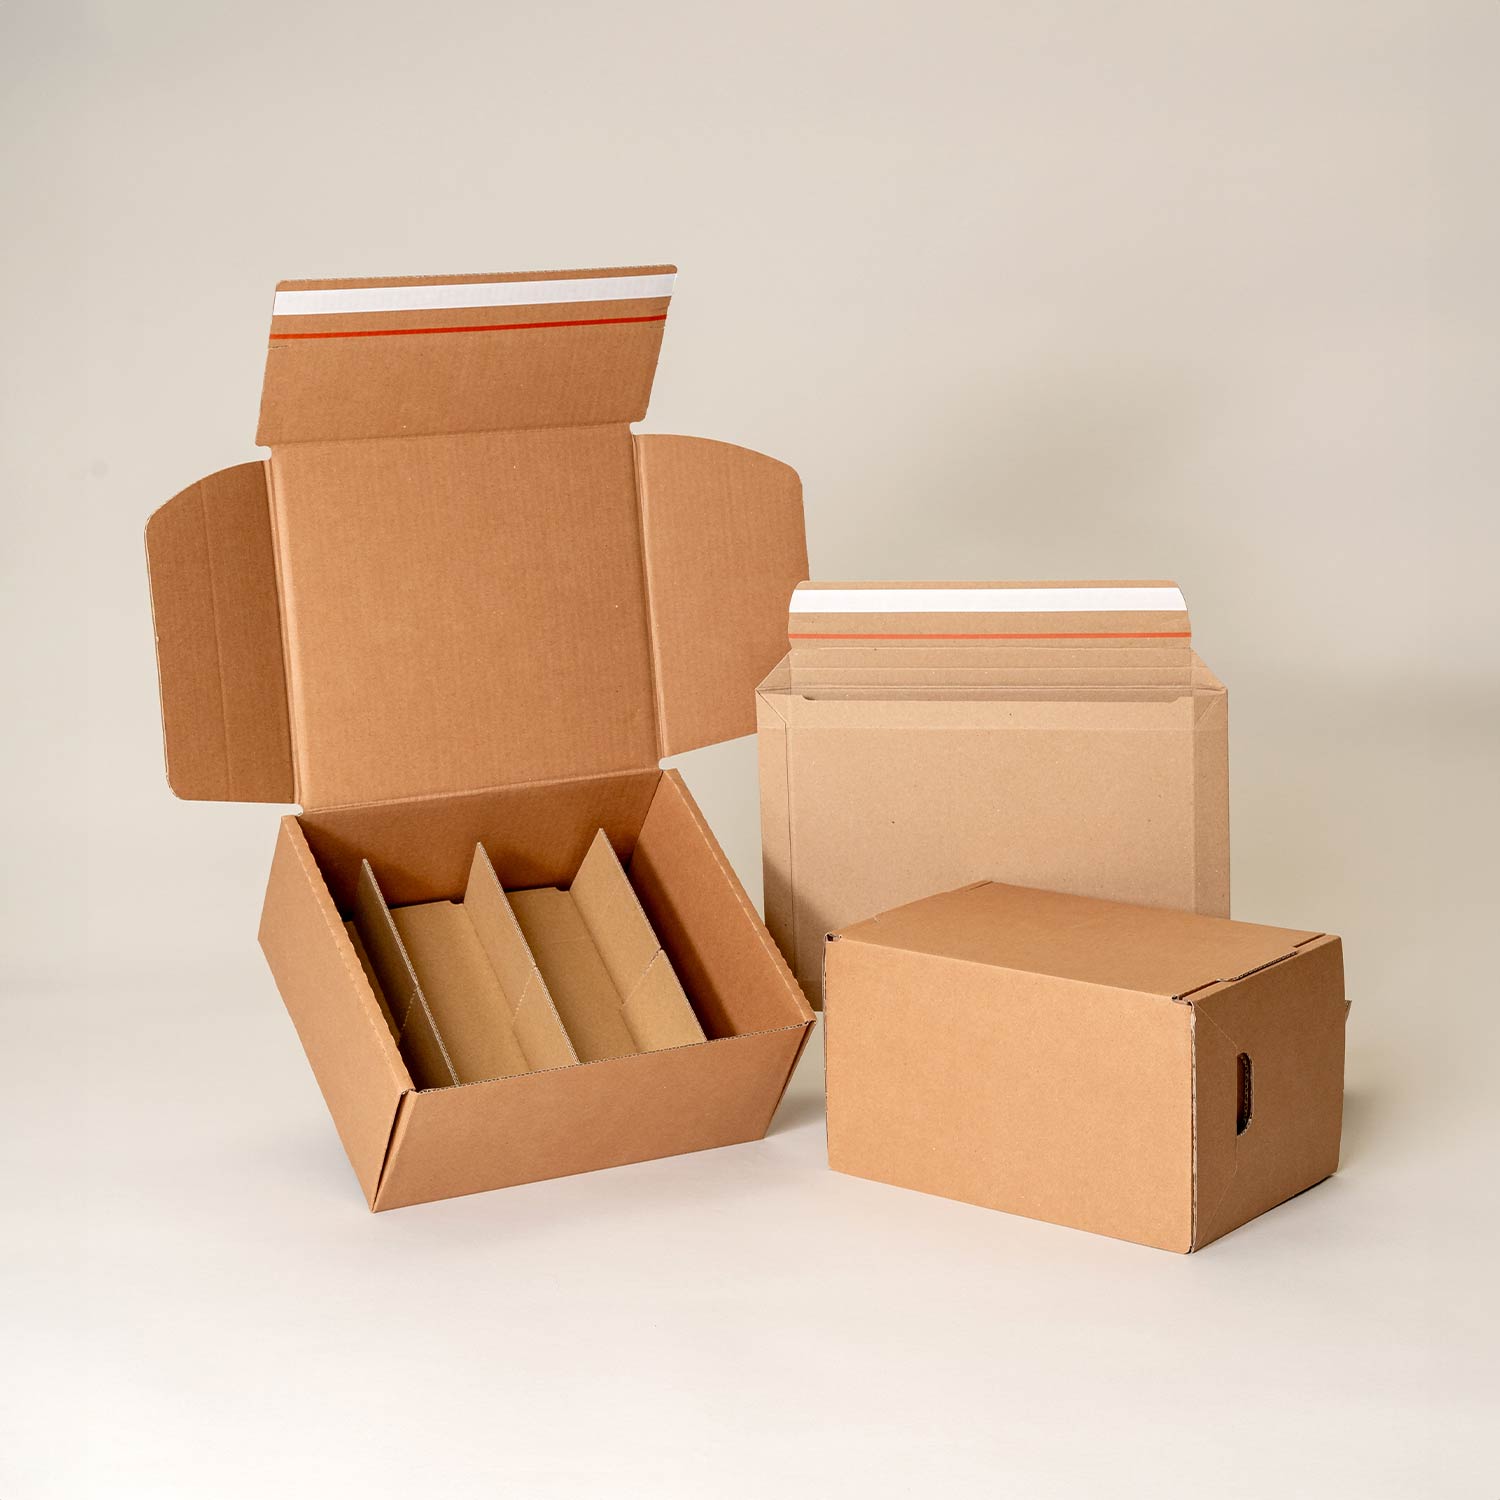 THIMM shipping boxes